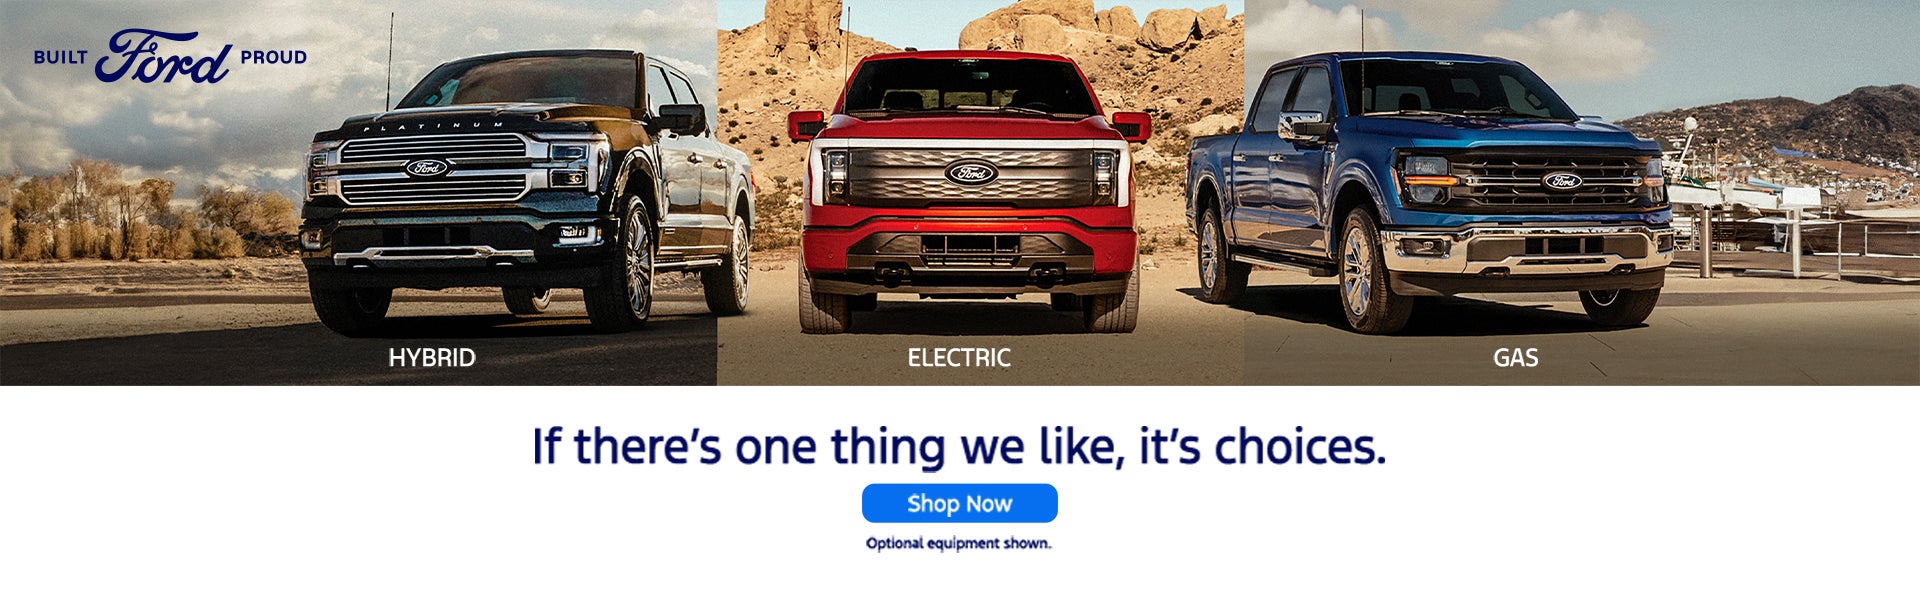 F150 Hybrid Electric or Gas Options